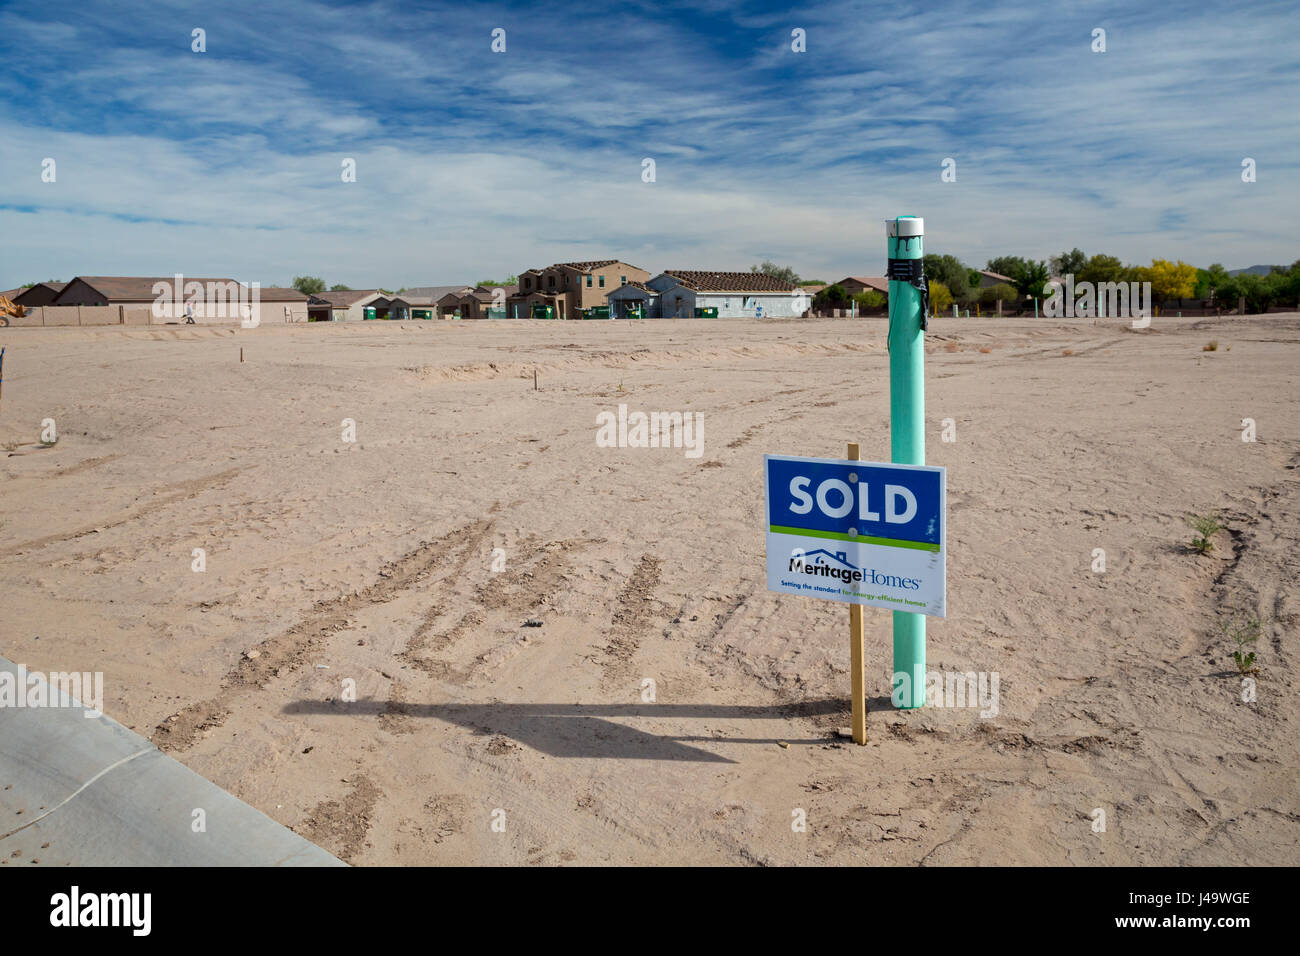 Marana, Arizona - Rapid construction of new home subdivisions in the northwest suburbs of Tucson. The desert land was formerly farmland. Stock Photo